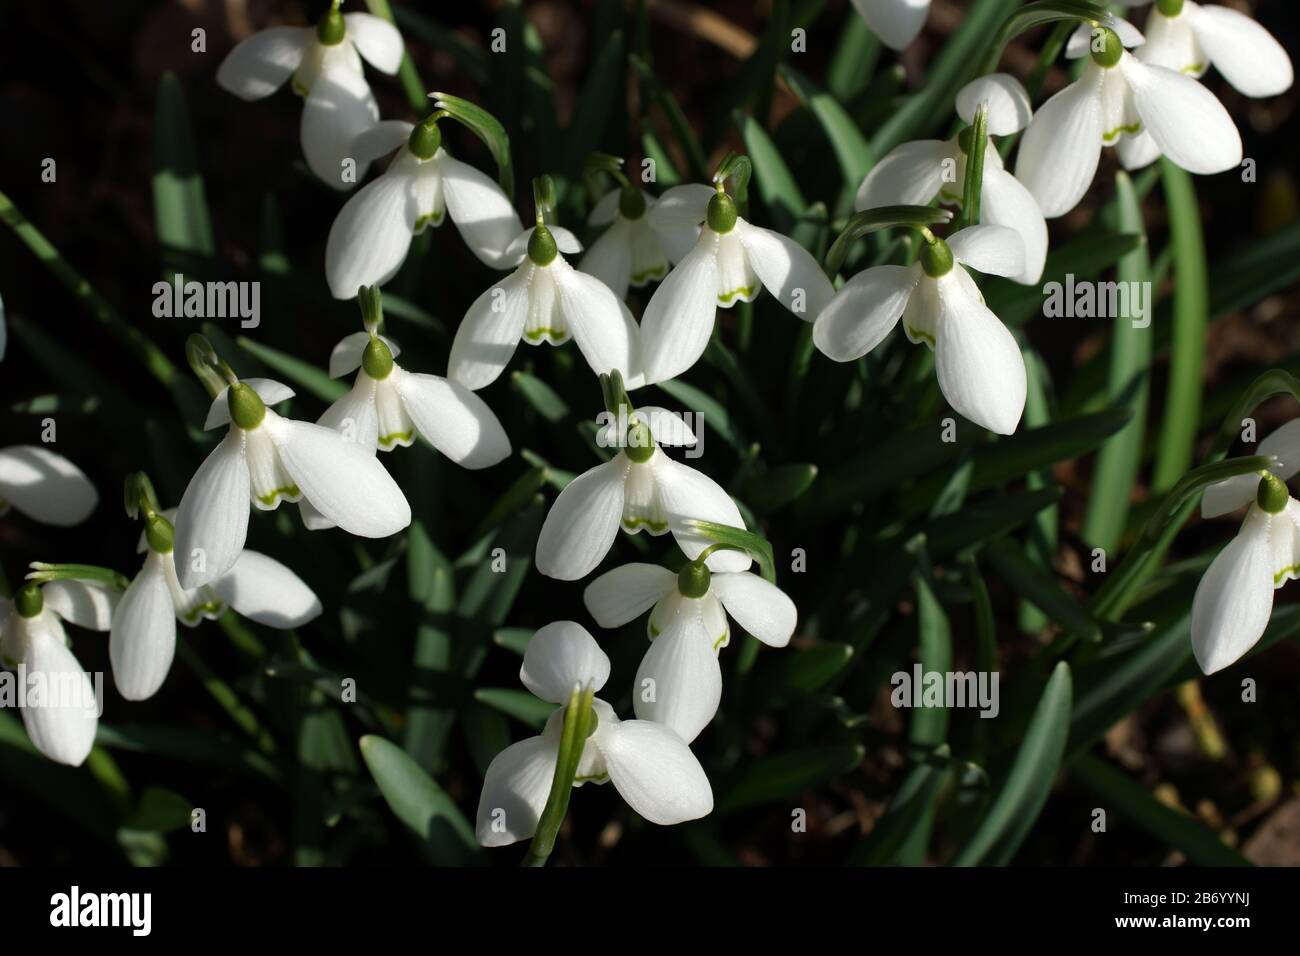 The first tender spring flowers in the open air. View from above. Galanthus nivalis, snowdrop, common snowdrop Stock Photo